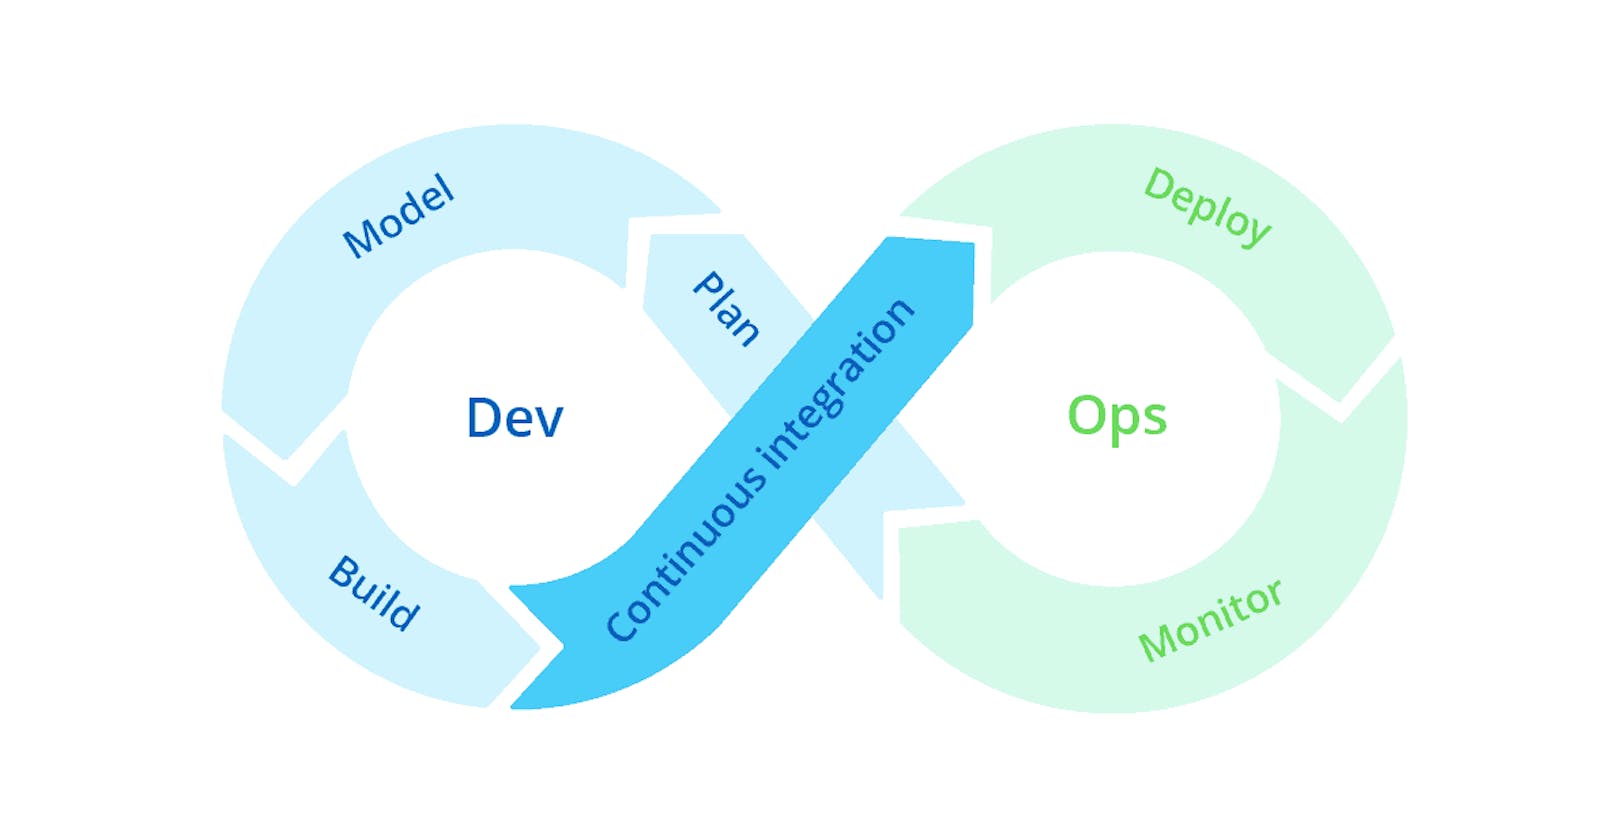 Day 3: The DevOps Lifecycle